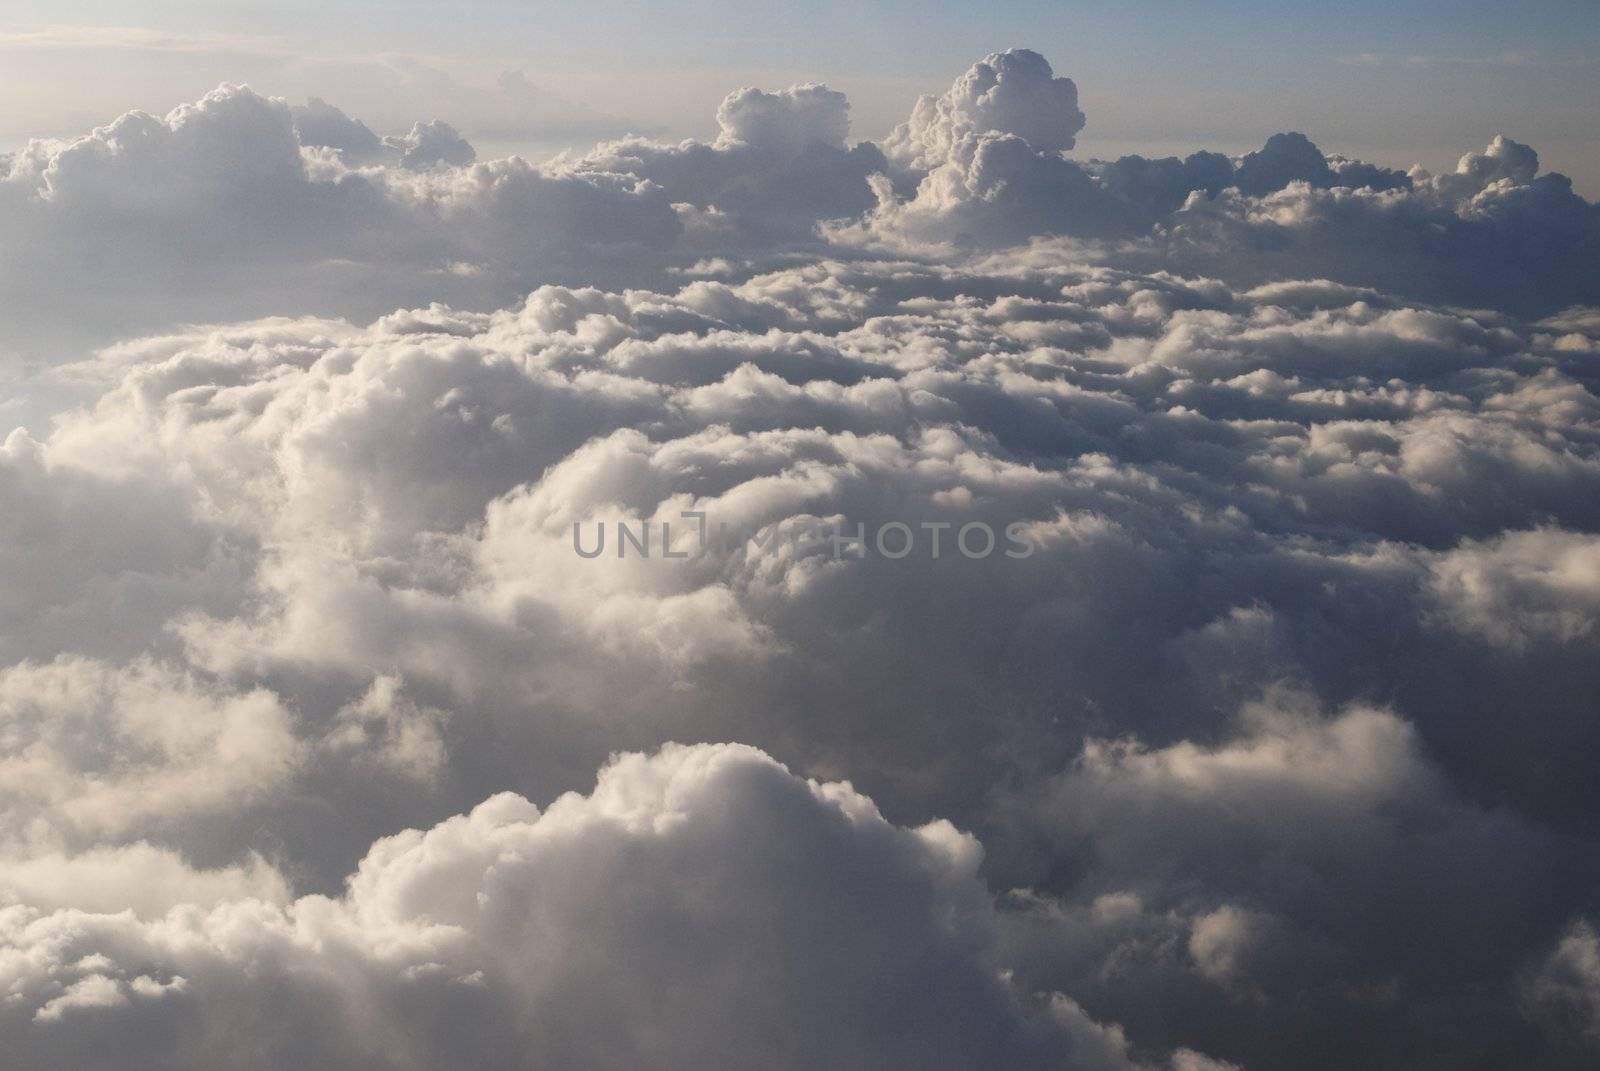 Looking DOWN at clouds from a jet